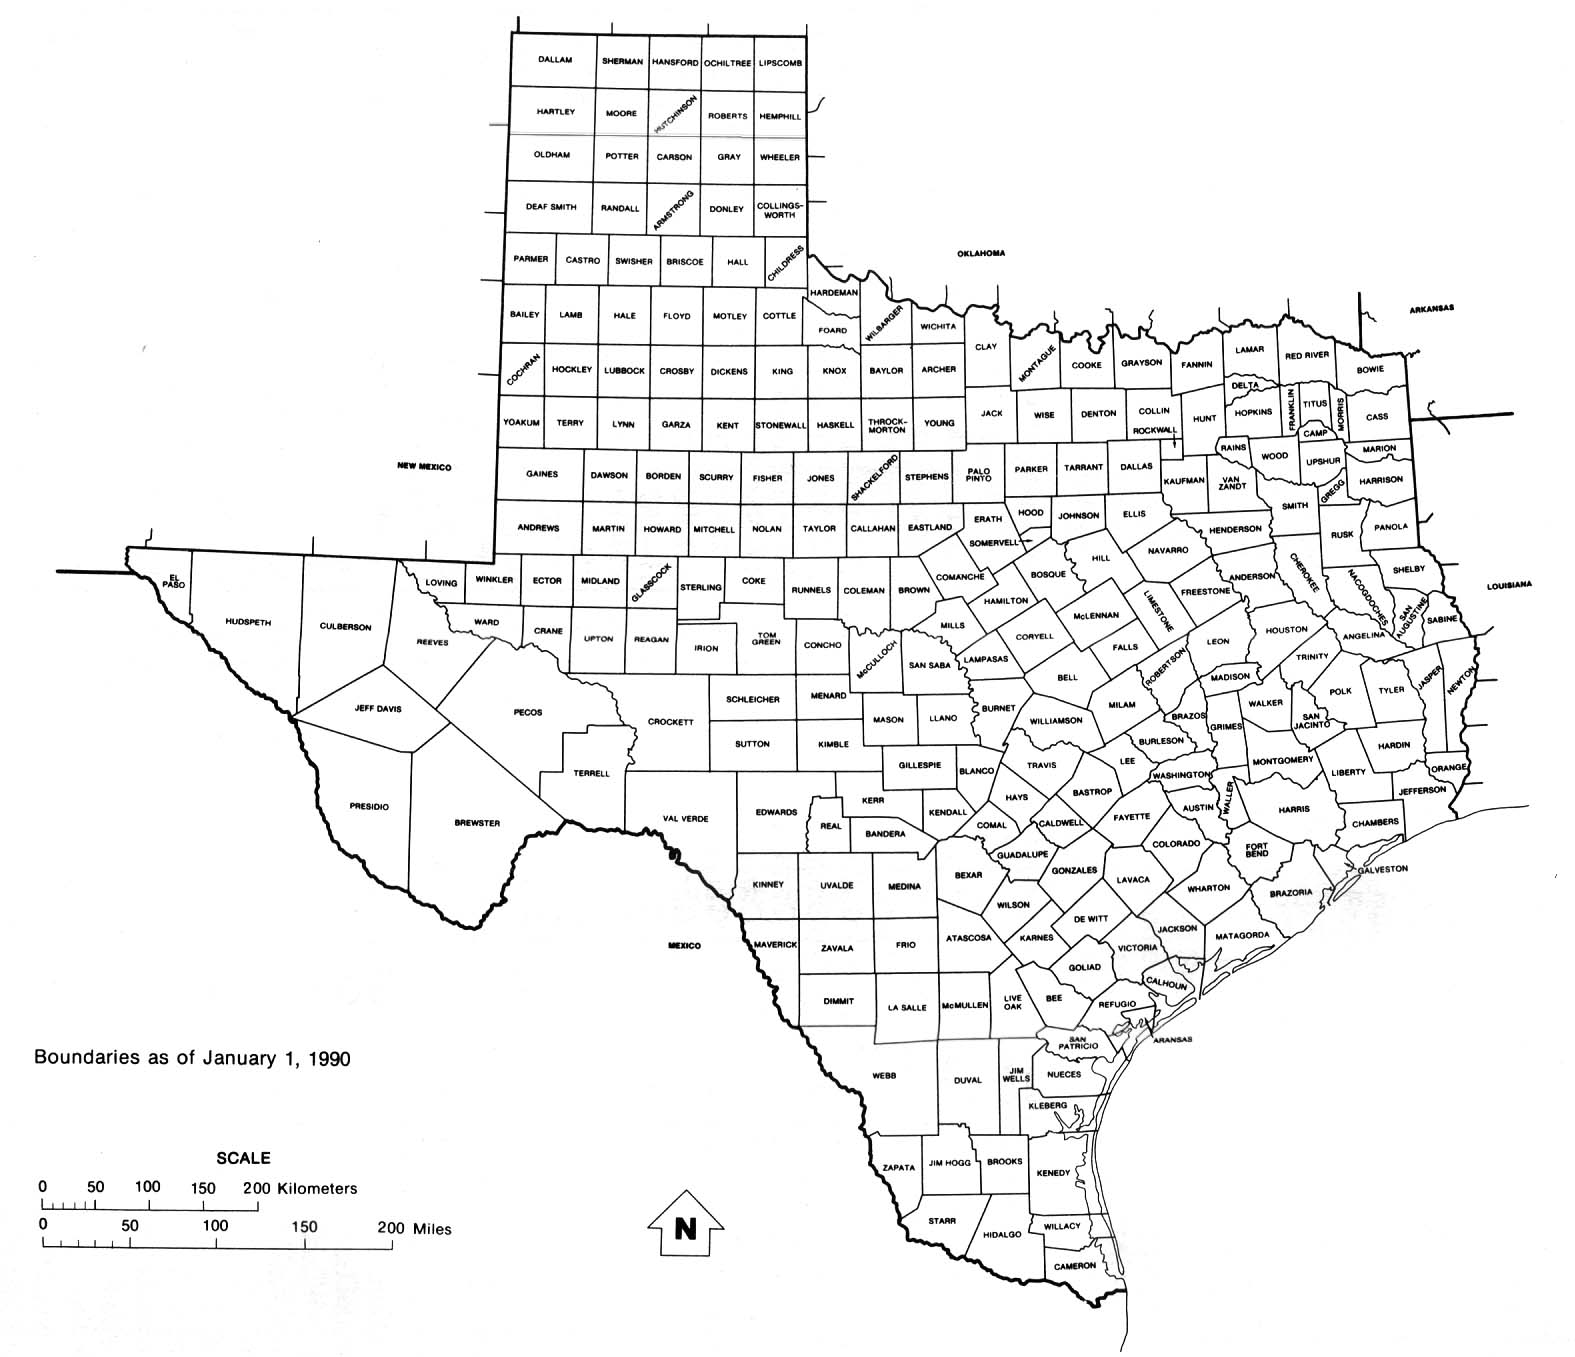 Outline Map Sites - Perry-Castaneda Map Collection - UT Library Online